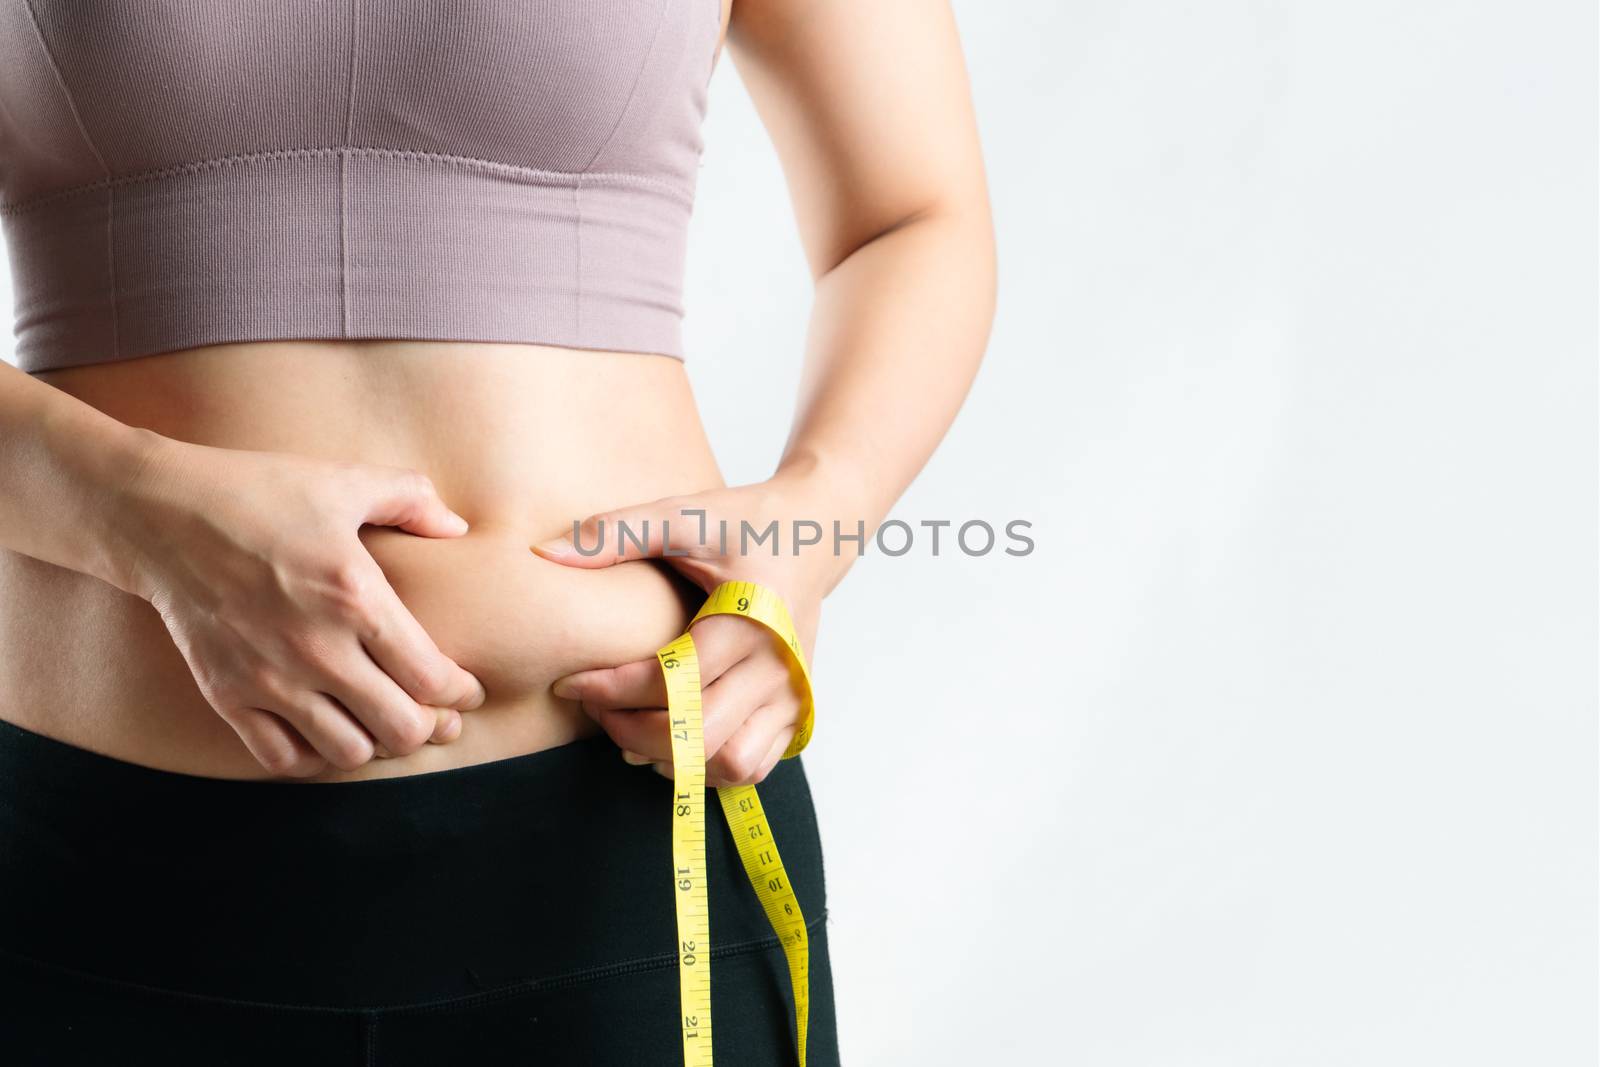 fat woman, fat belly, chubby, obese woman hand holding excessive belly fat with measure tape, woman diet lifestyle concept